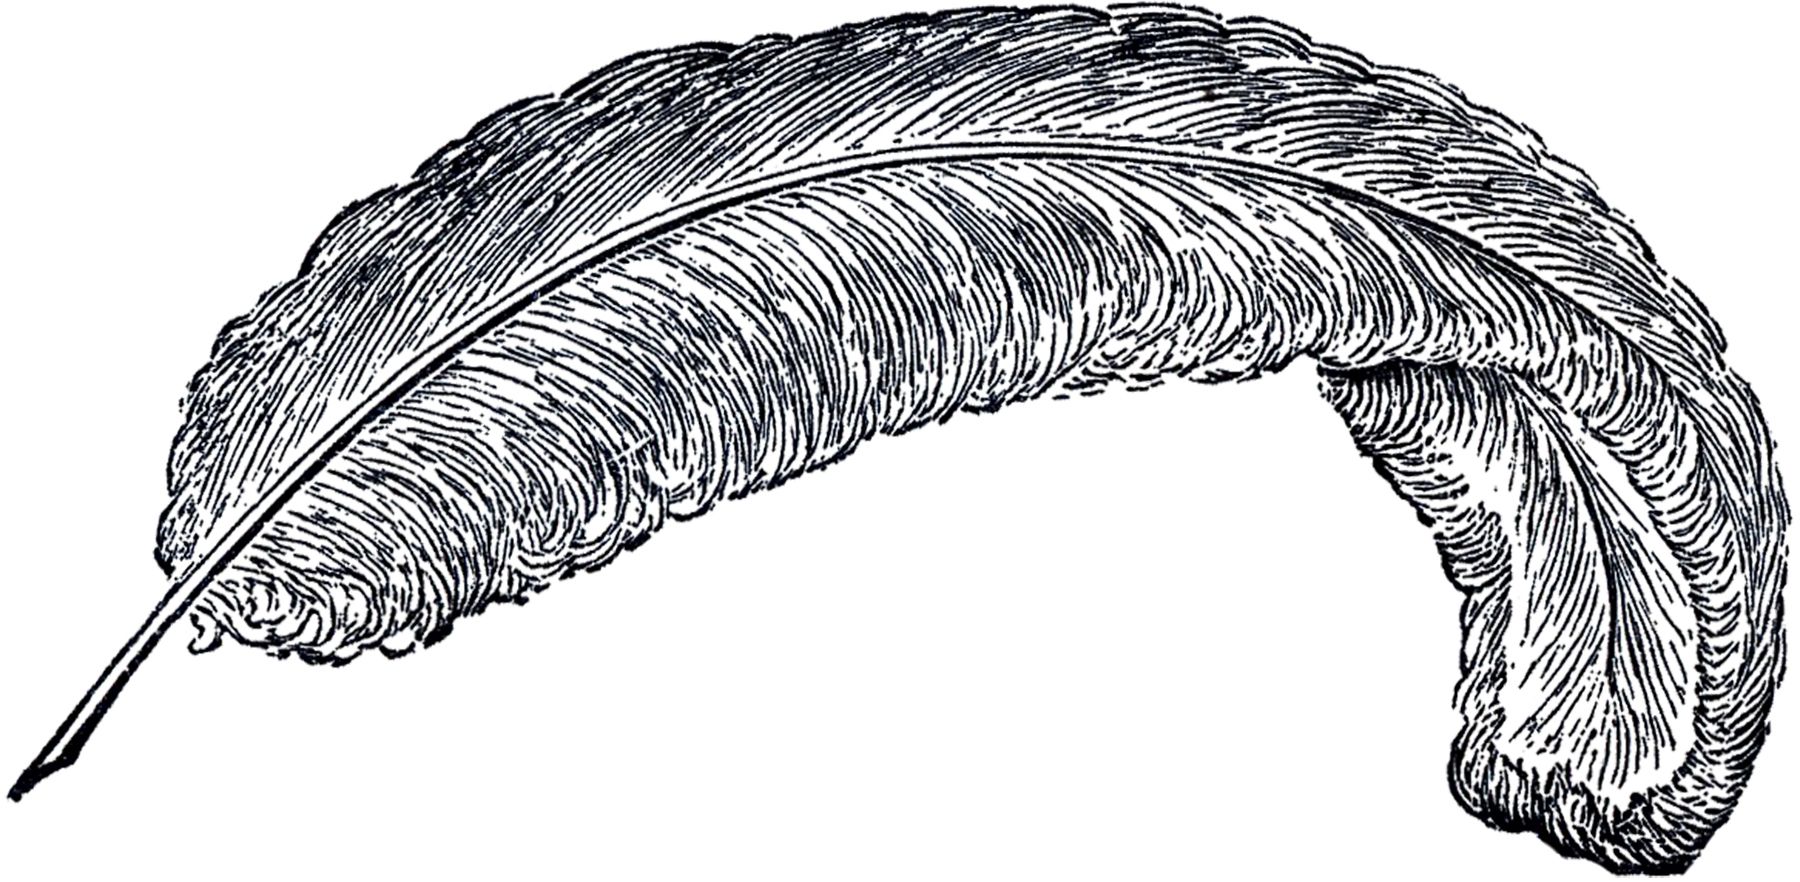 Ostrich Feathers Clipart.